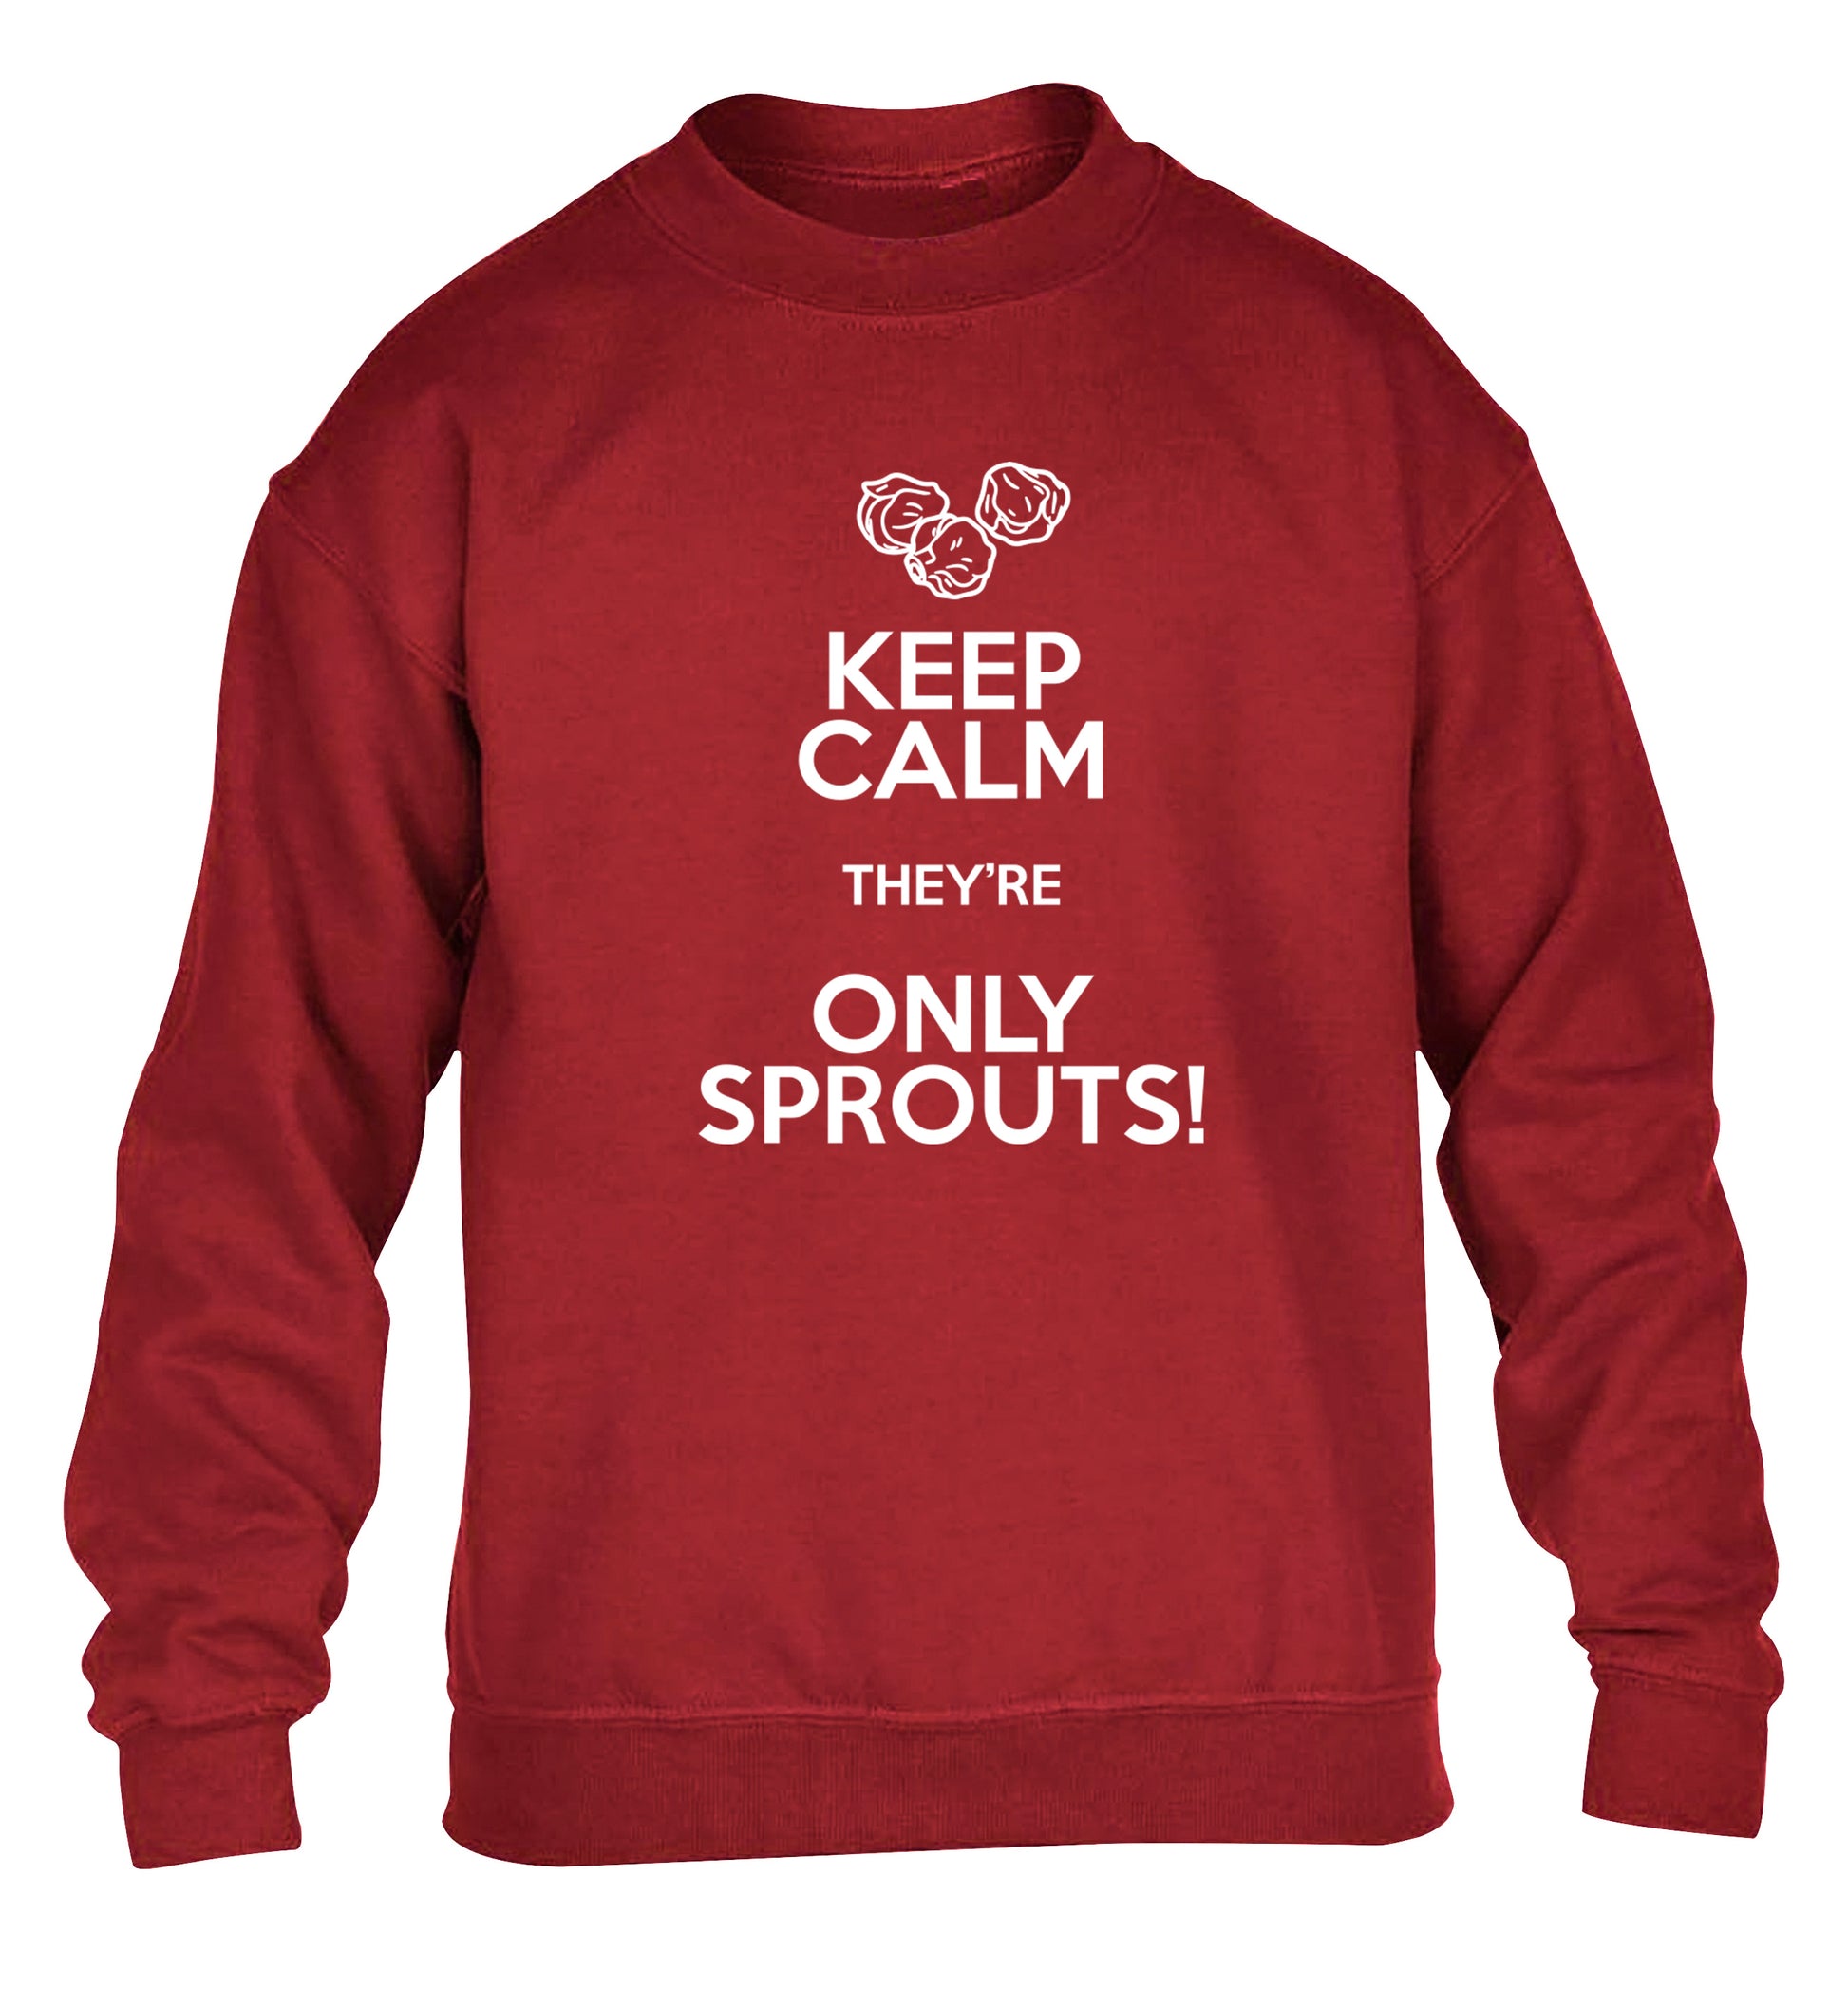 Keep calm they're only sprouts children's grey sweater 12-13 Years